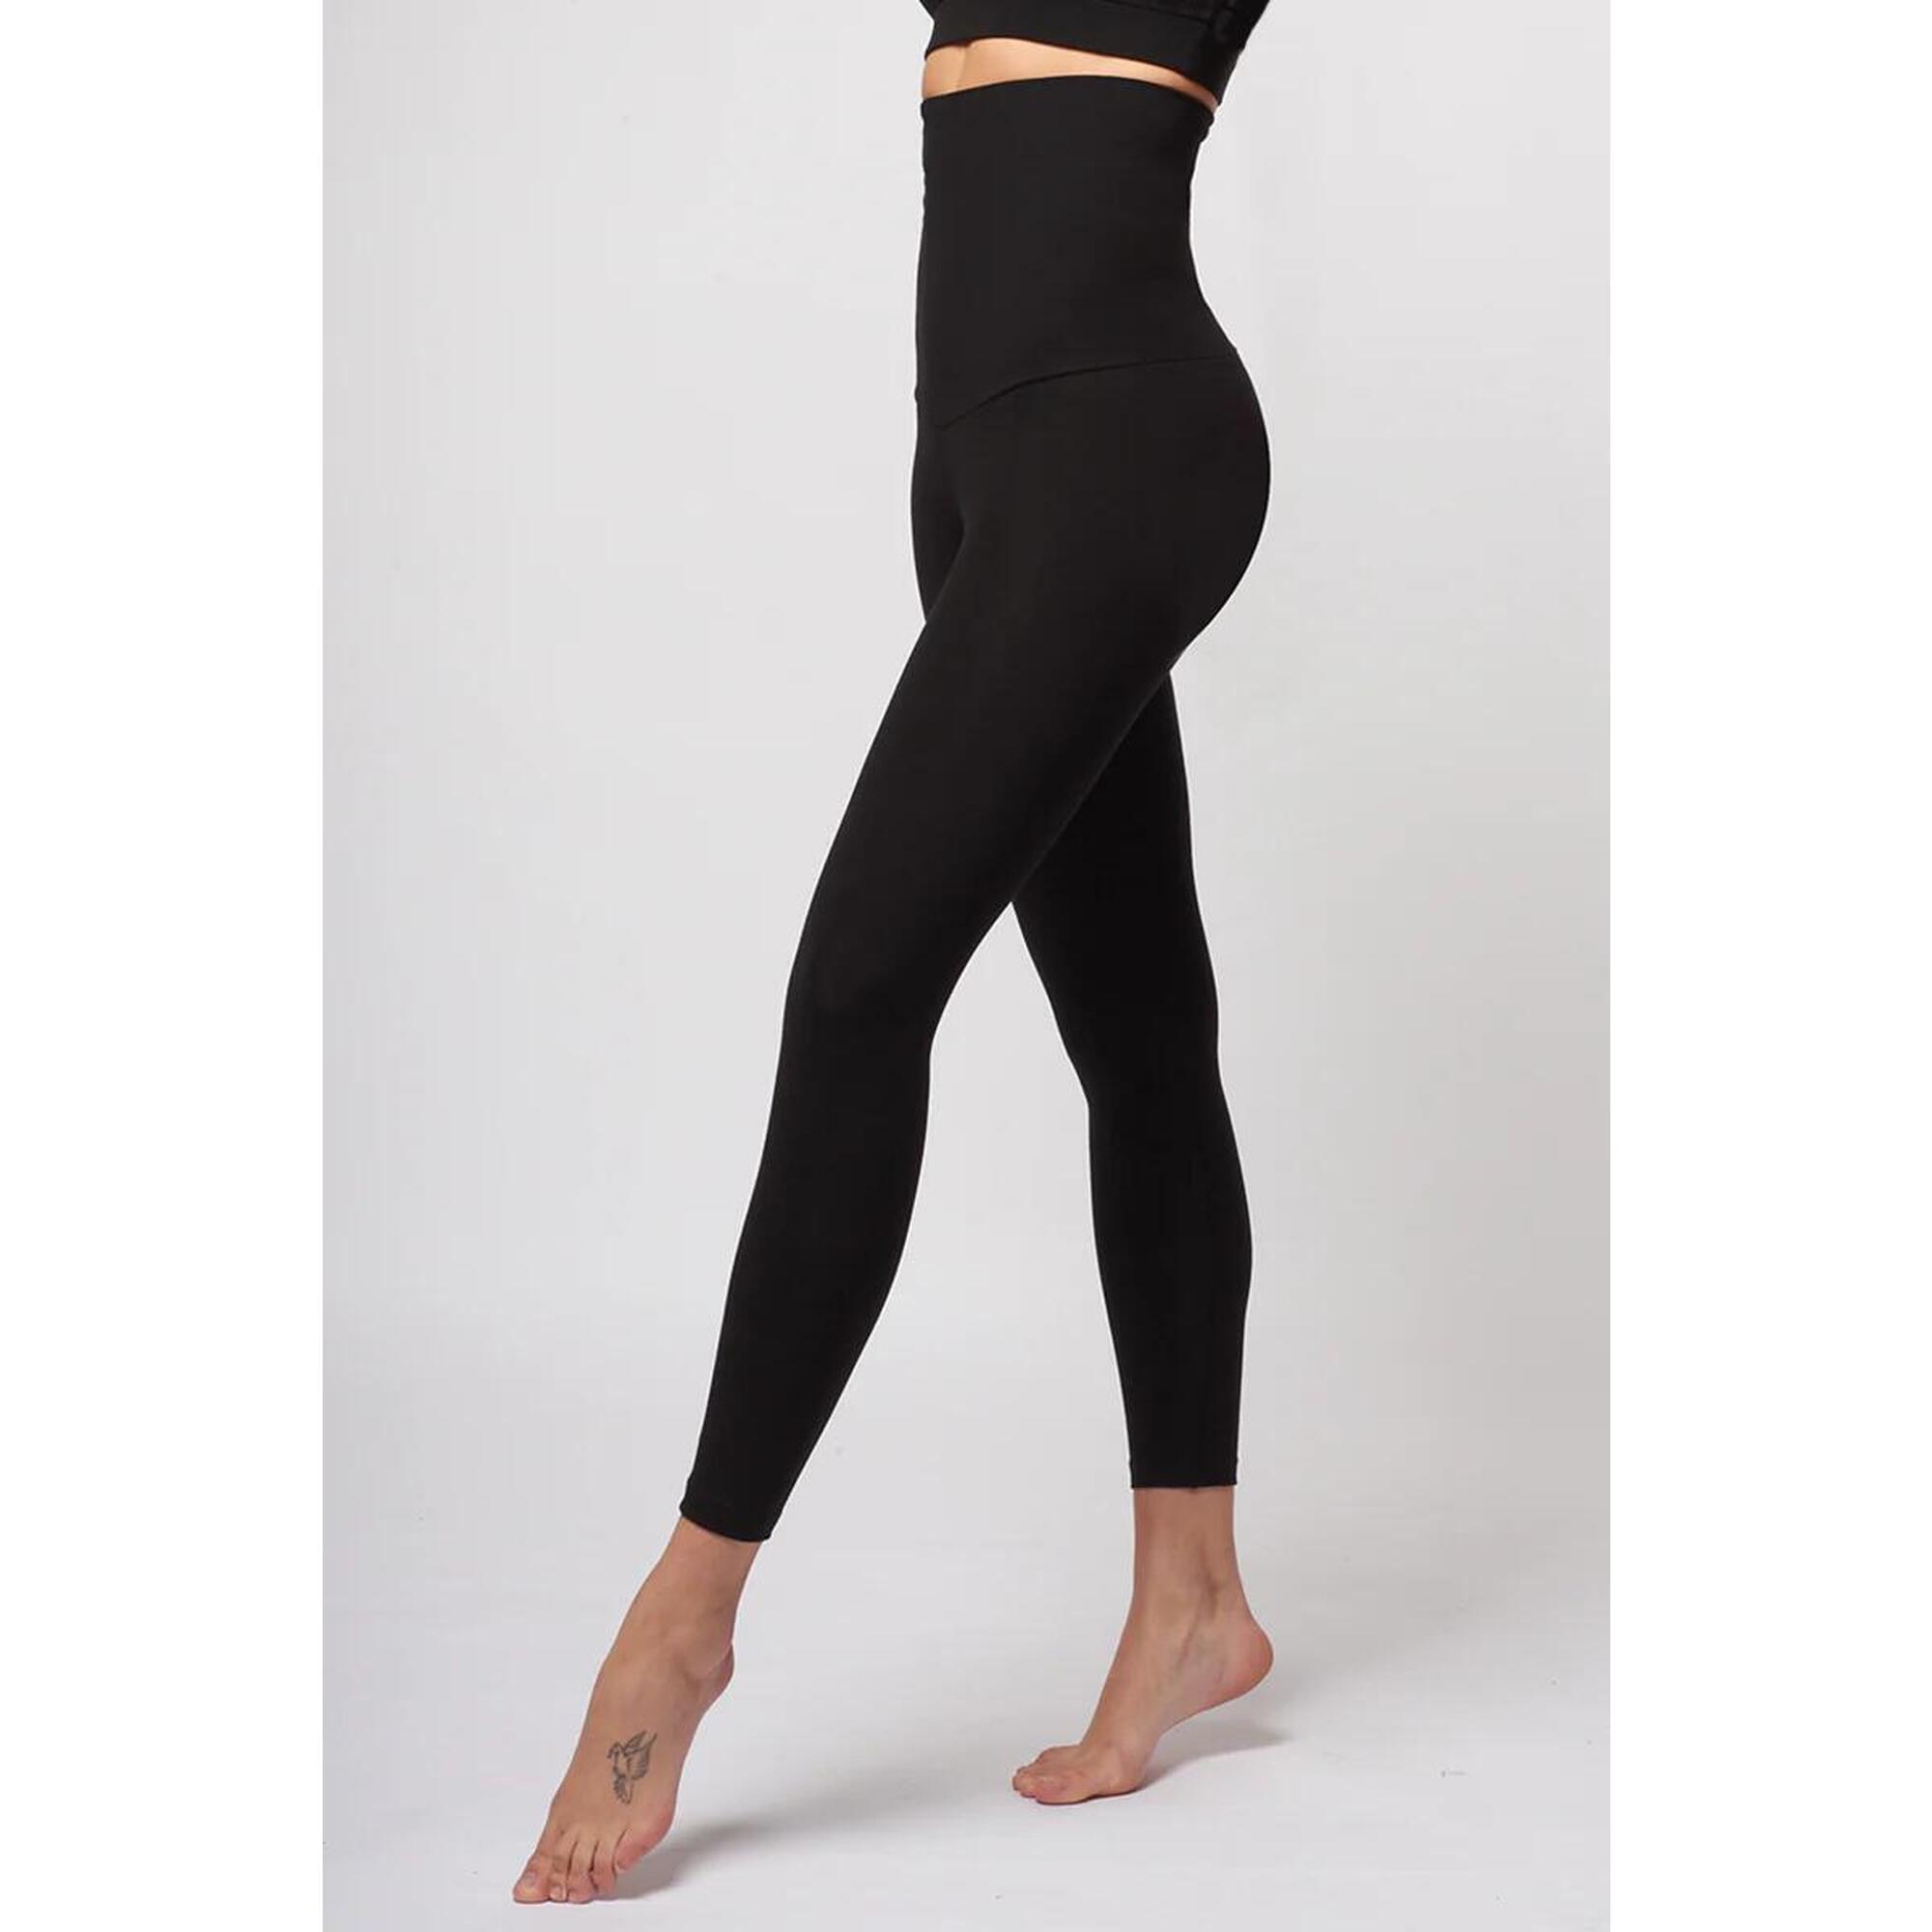 Extra Strong Compression Stirrup Leggings with Tummy Control Black